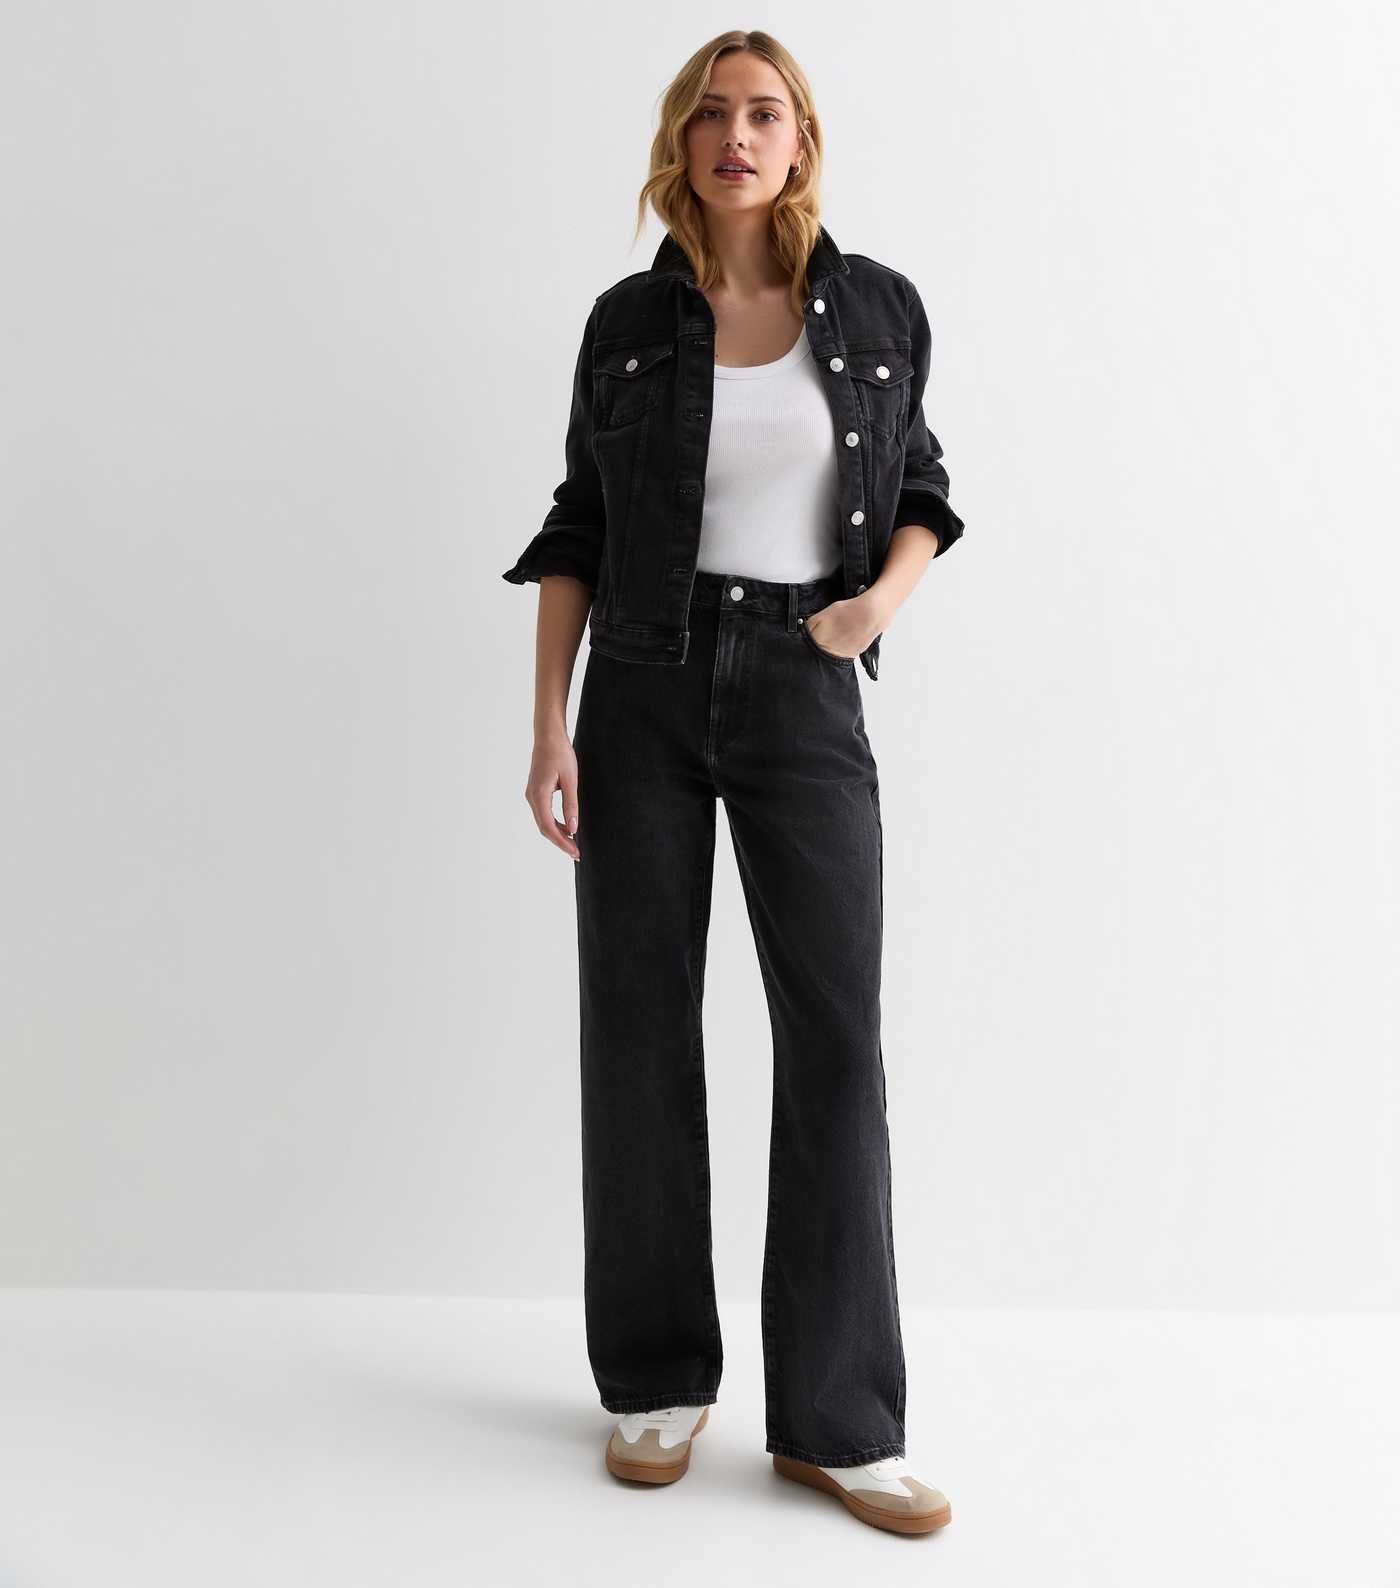 Black High Waist Adalae Wide Leg Jeans
						
						Add to Saved Items
						Remove from Saved It... | New Look (UK)